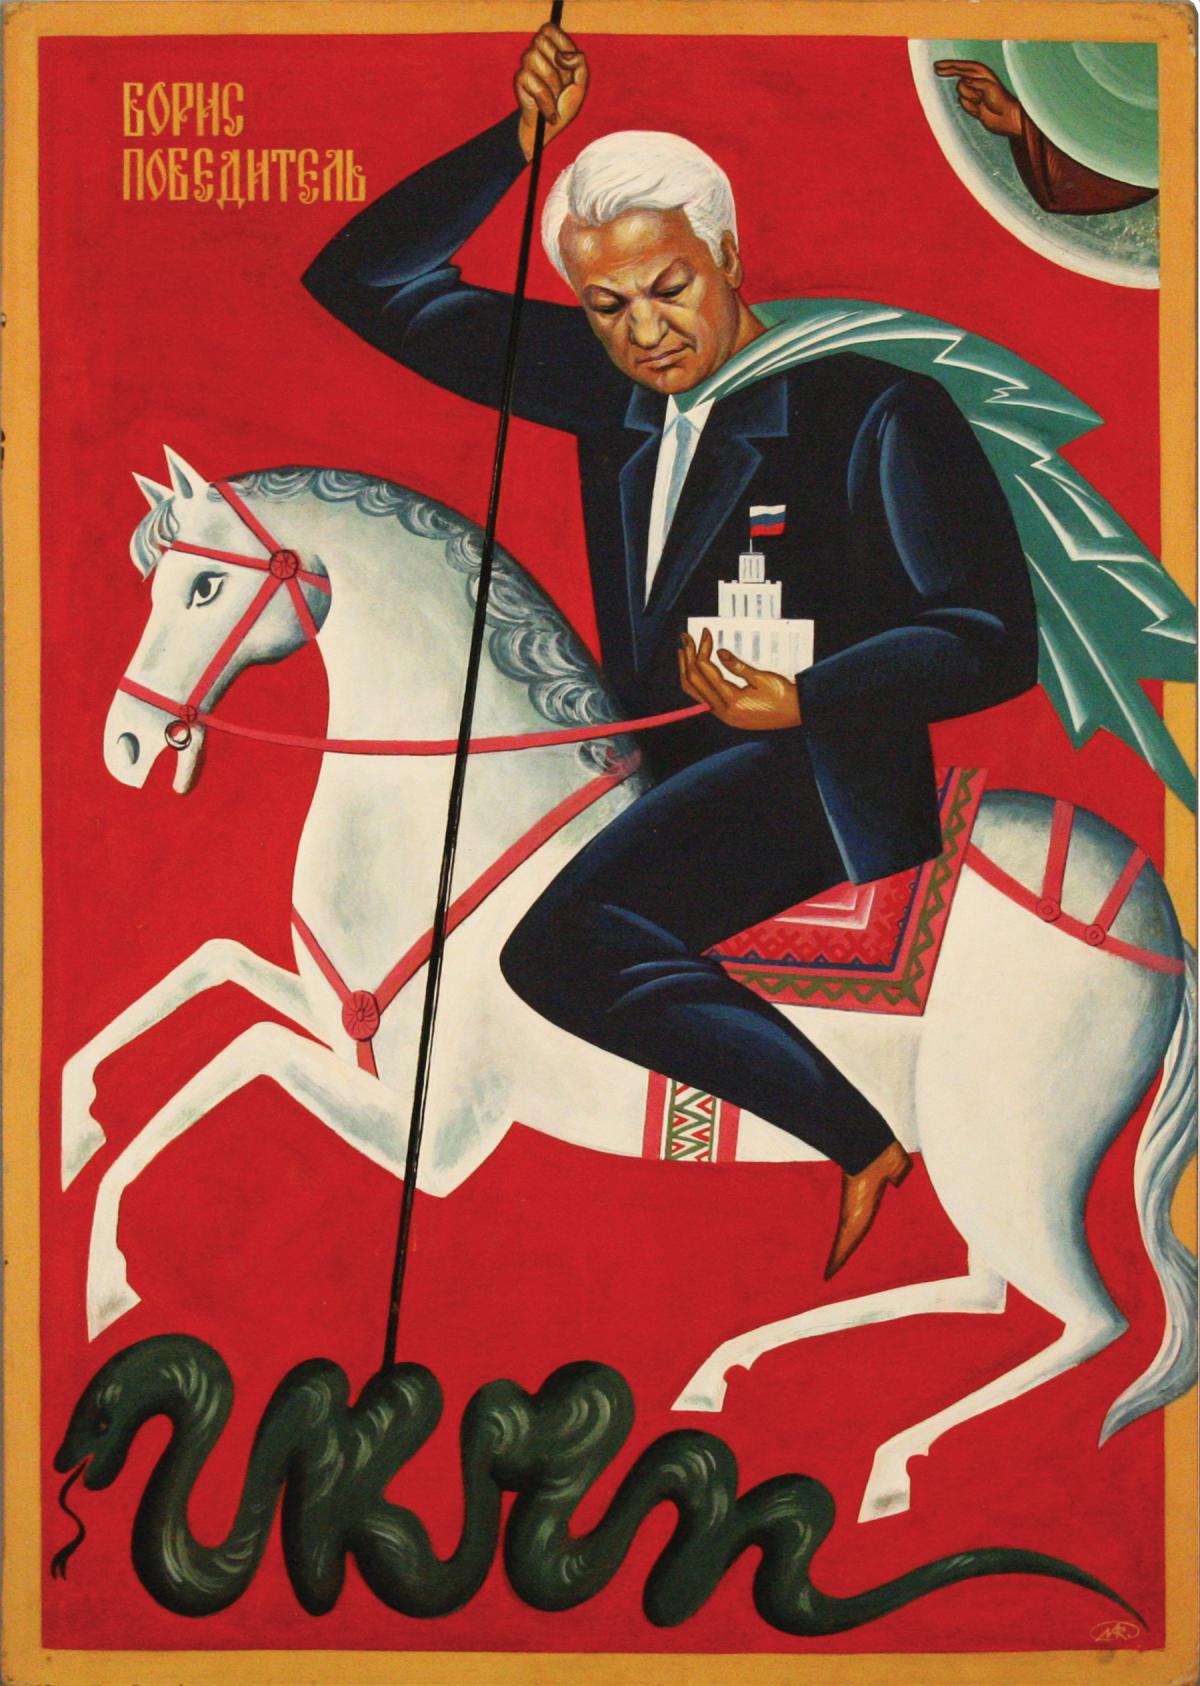 Boris Yeltsin in a dark suit and cape, depicted riding a white horse and stabbing a long green snake